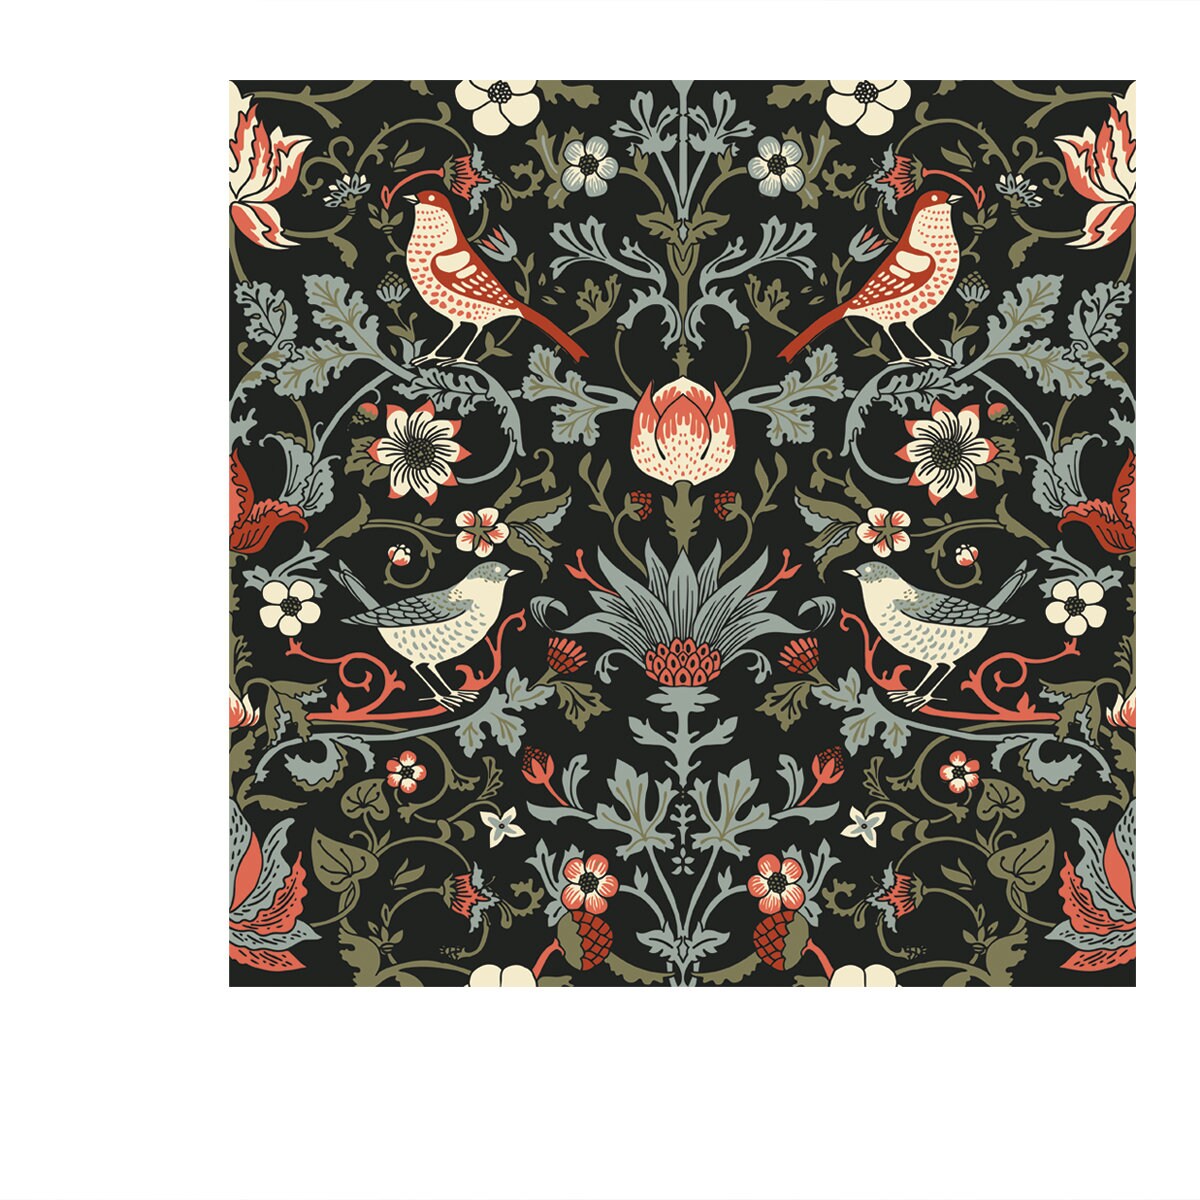 Dark Enchanted Vintage Flowers and Birds Seamless Pattern Vector. Magic Forest Background Wallpaper Bedroom Mural